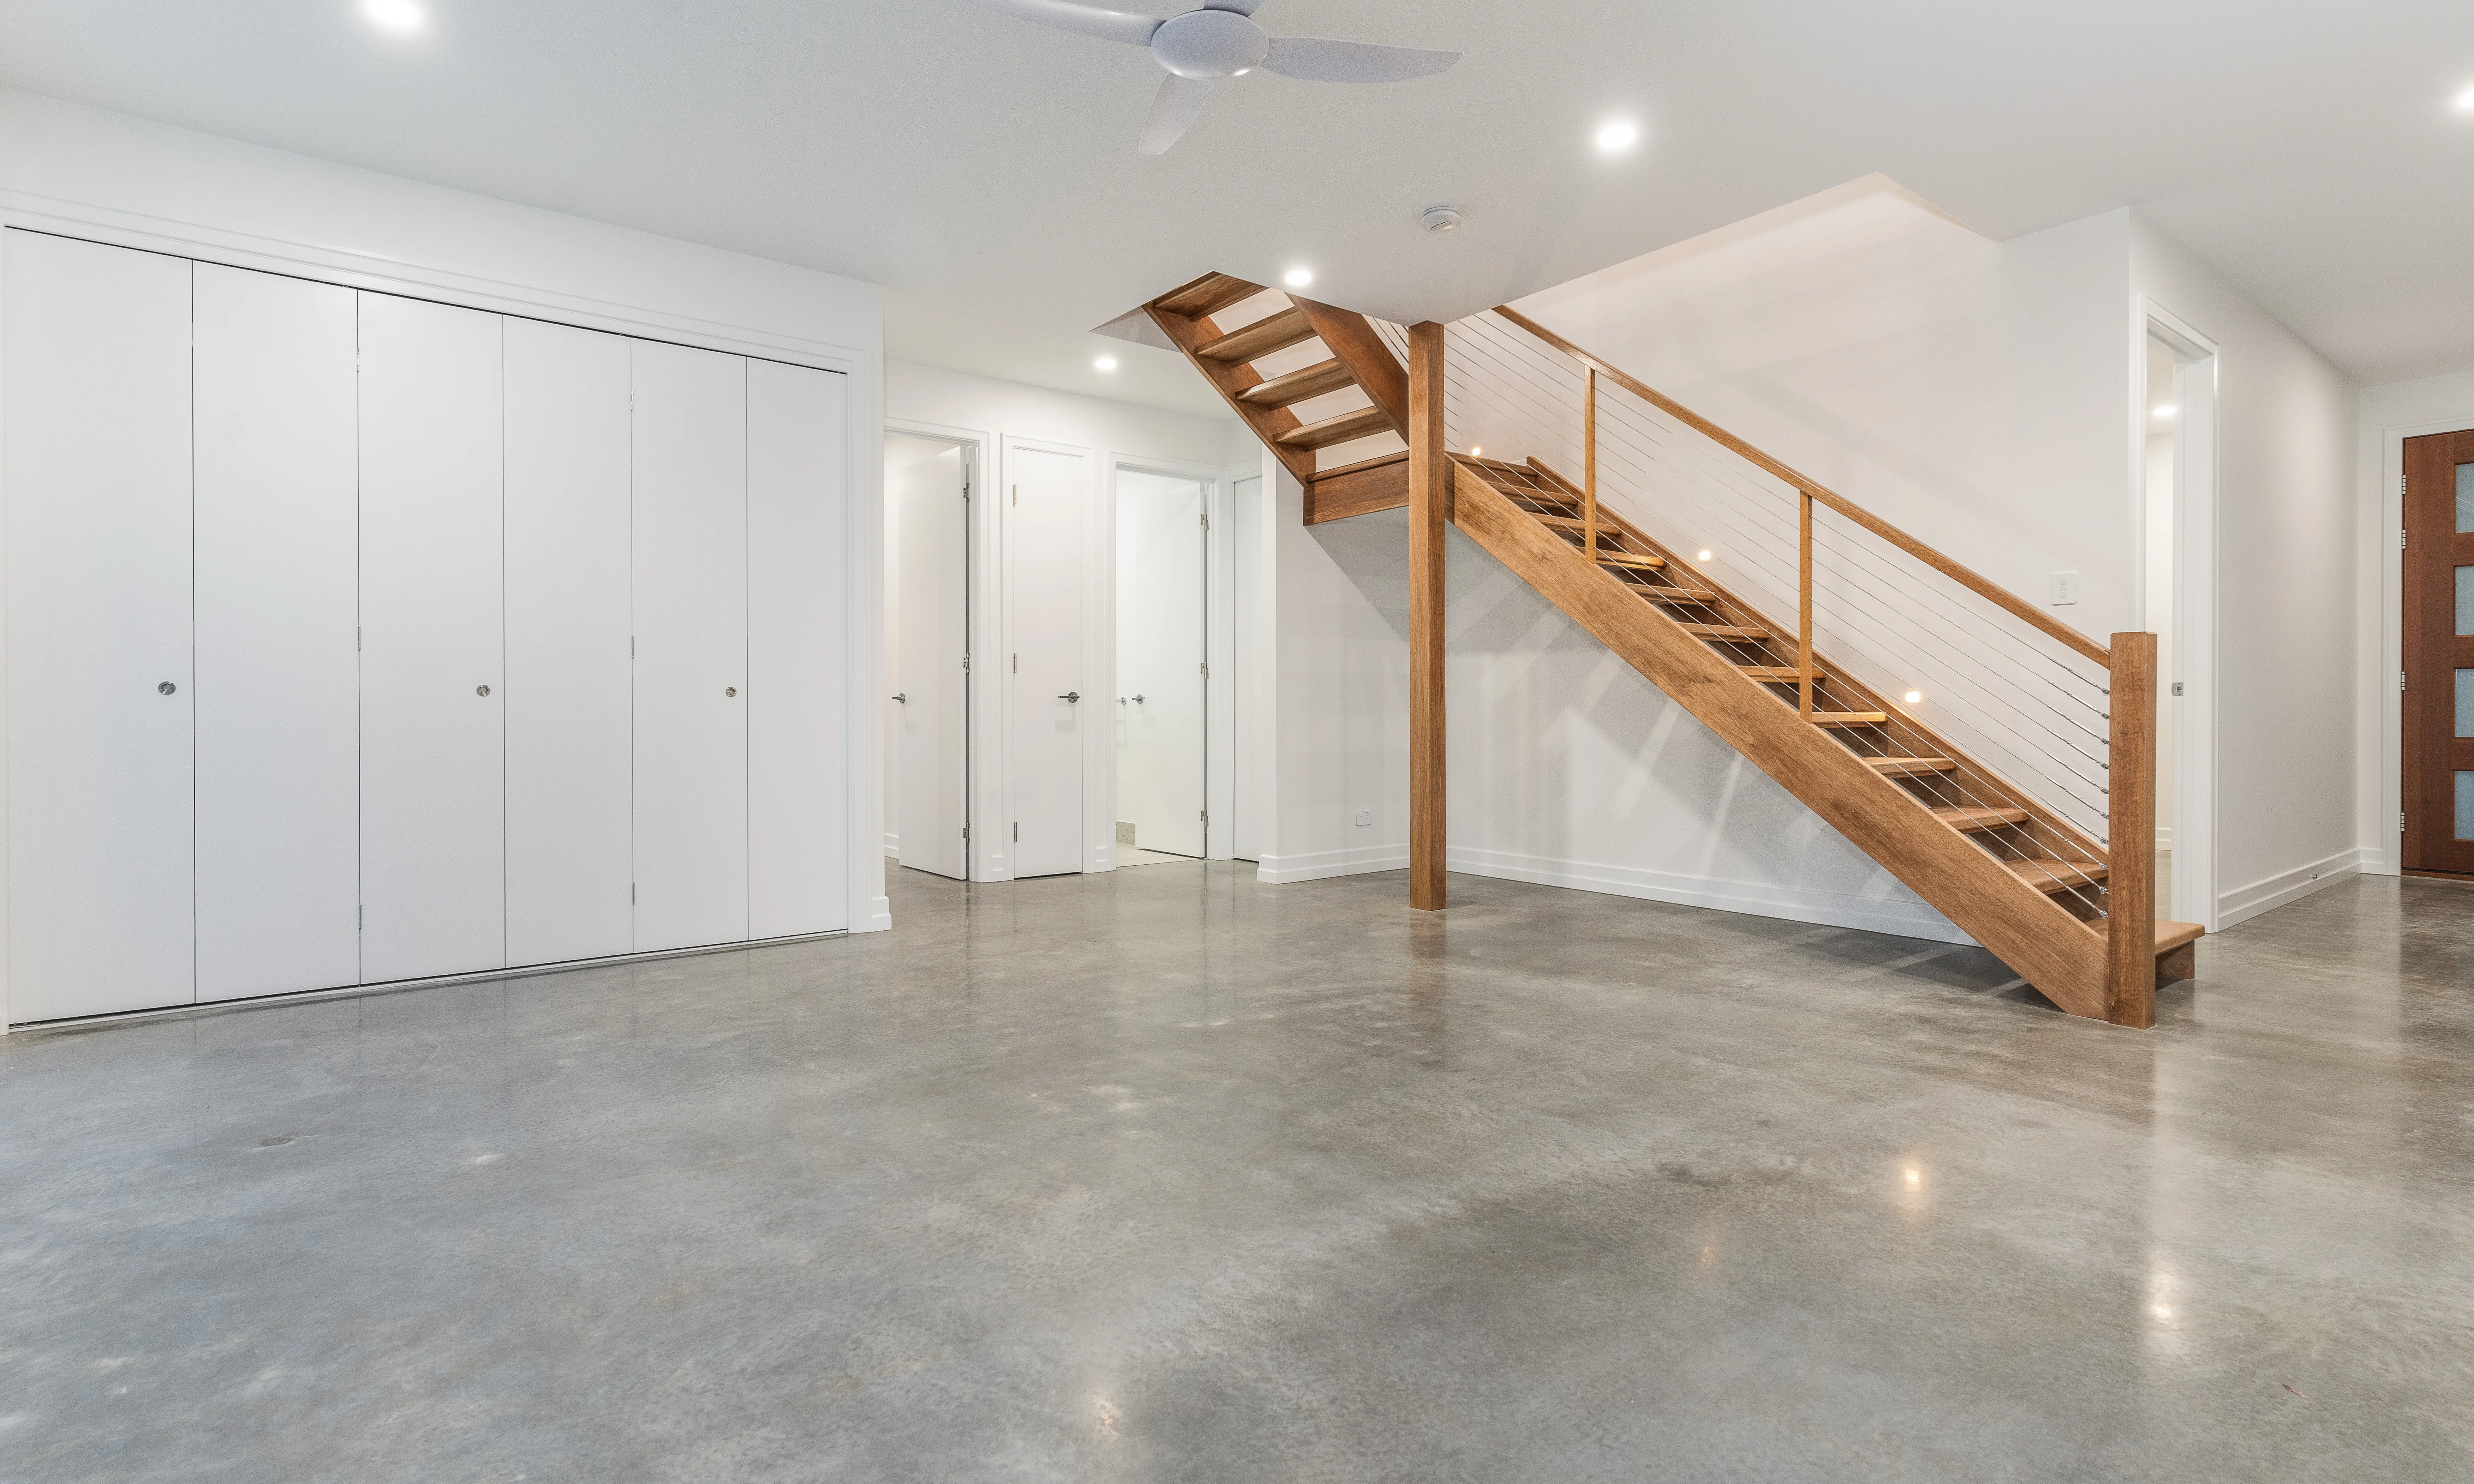 polished concrete floors-bifold doors-wire balustrade-timber handrail- timber stairs